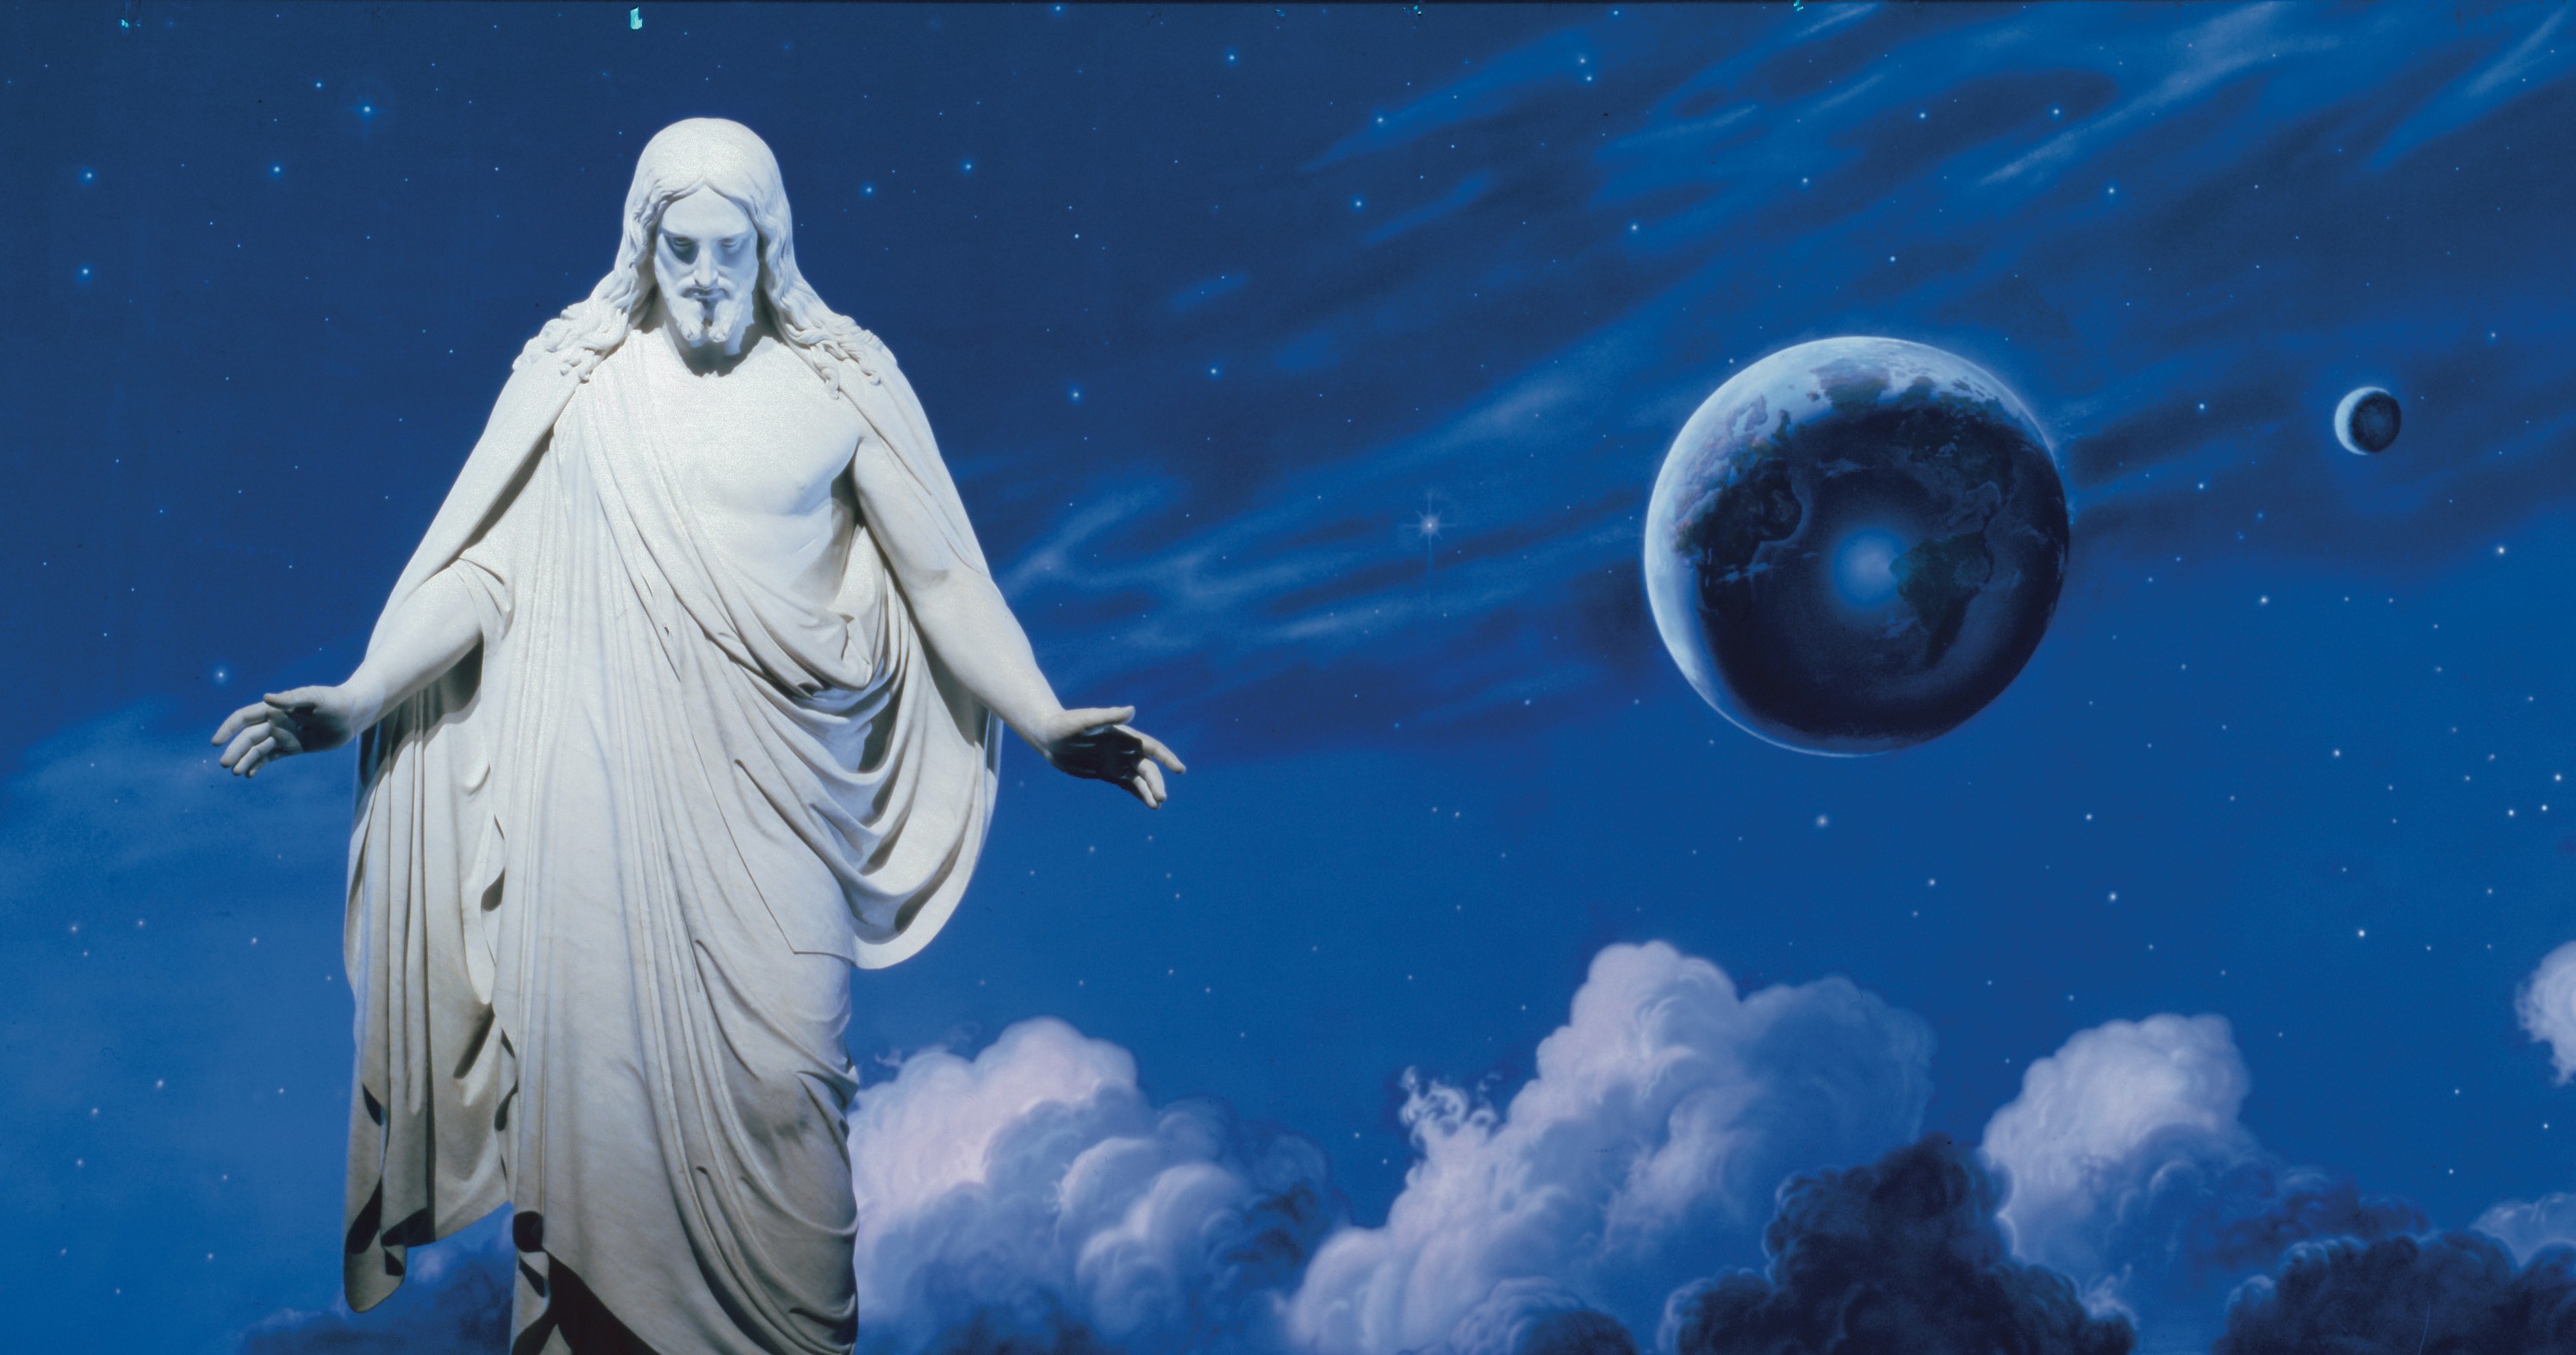 The resurrected Jesus Christ standing with His arms slightly extended. The wounds of the Crucifixion are visible in the hands, feet and side of Christ.  The "Universe" mural by Sidney King is visible behind the Christus statue.